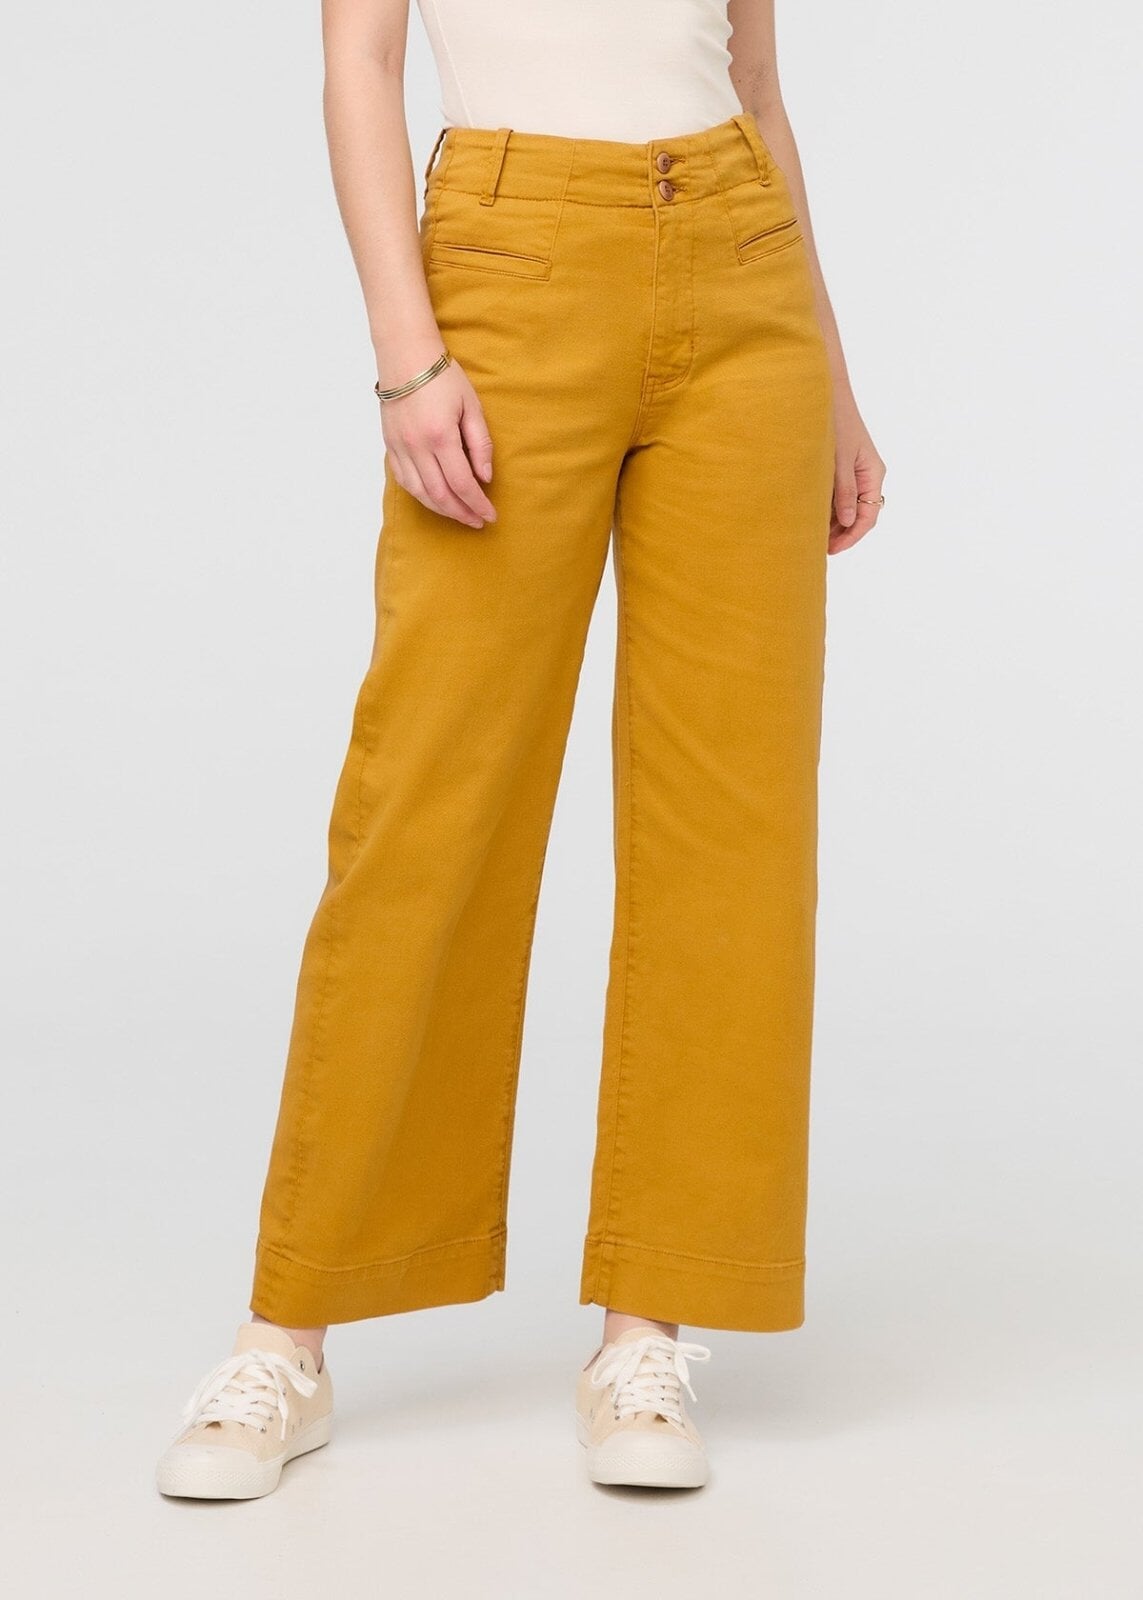 womens yellow high rise trouser front